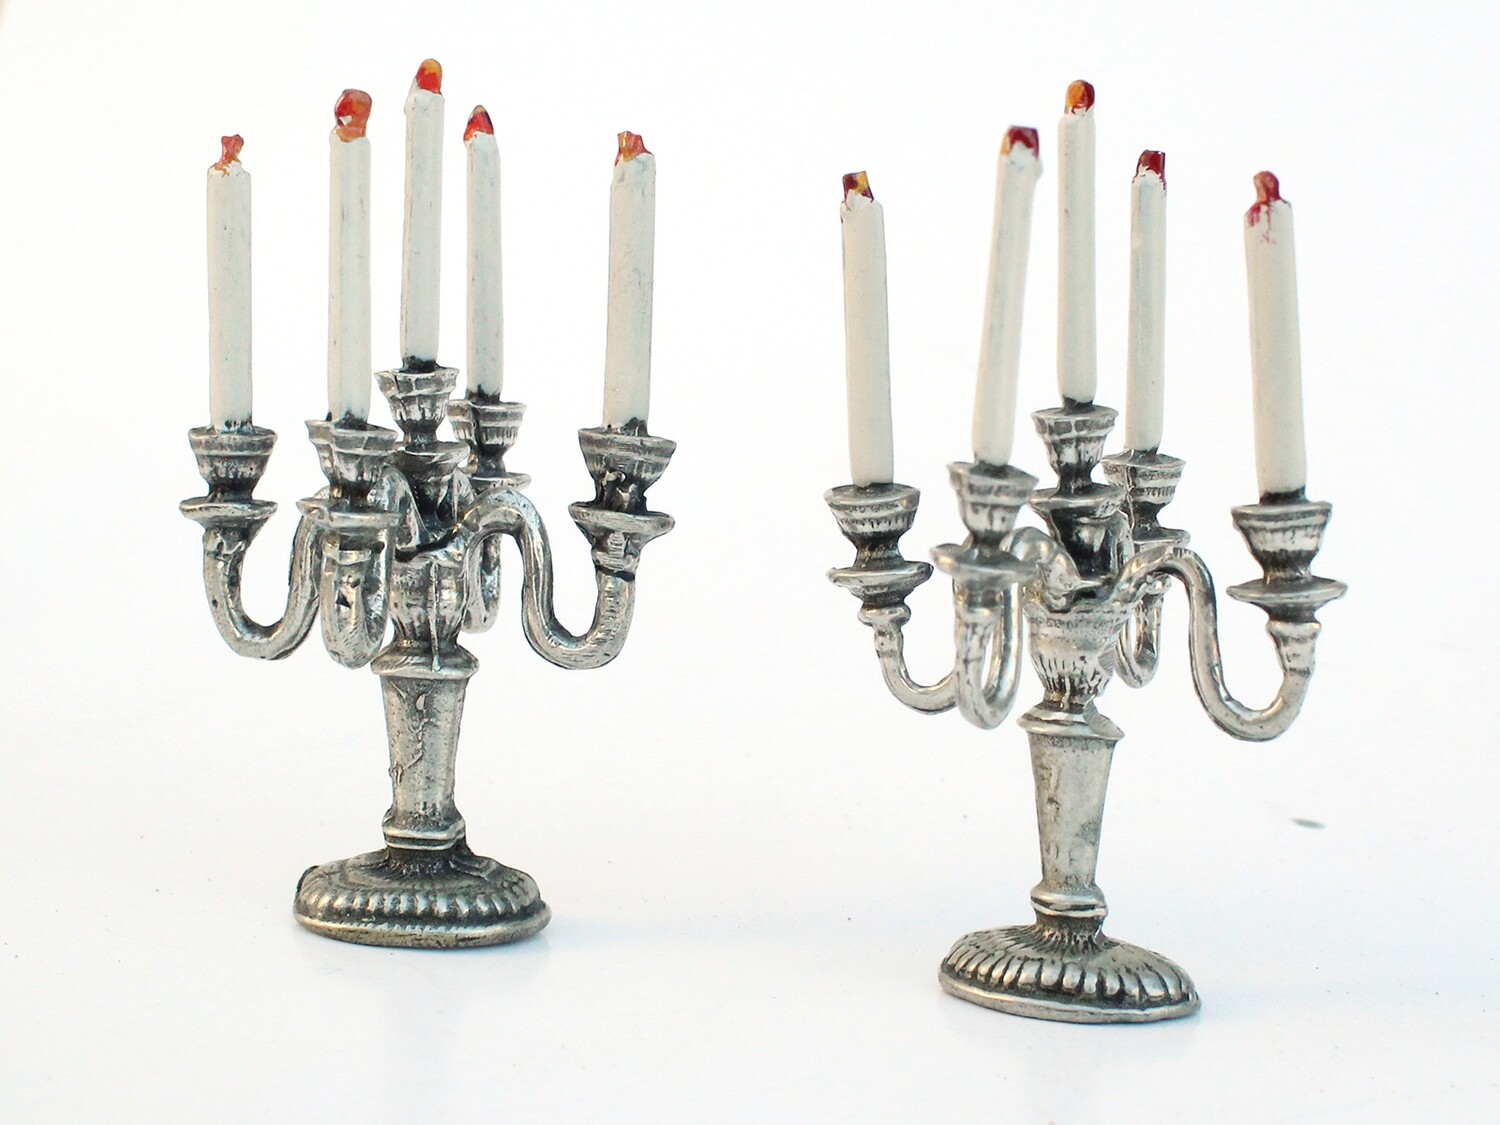 Pair of 5 Candle Soft Metal Candlesticks